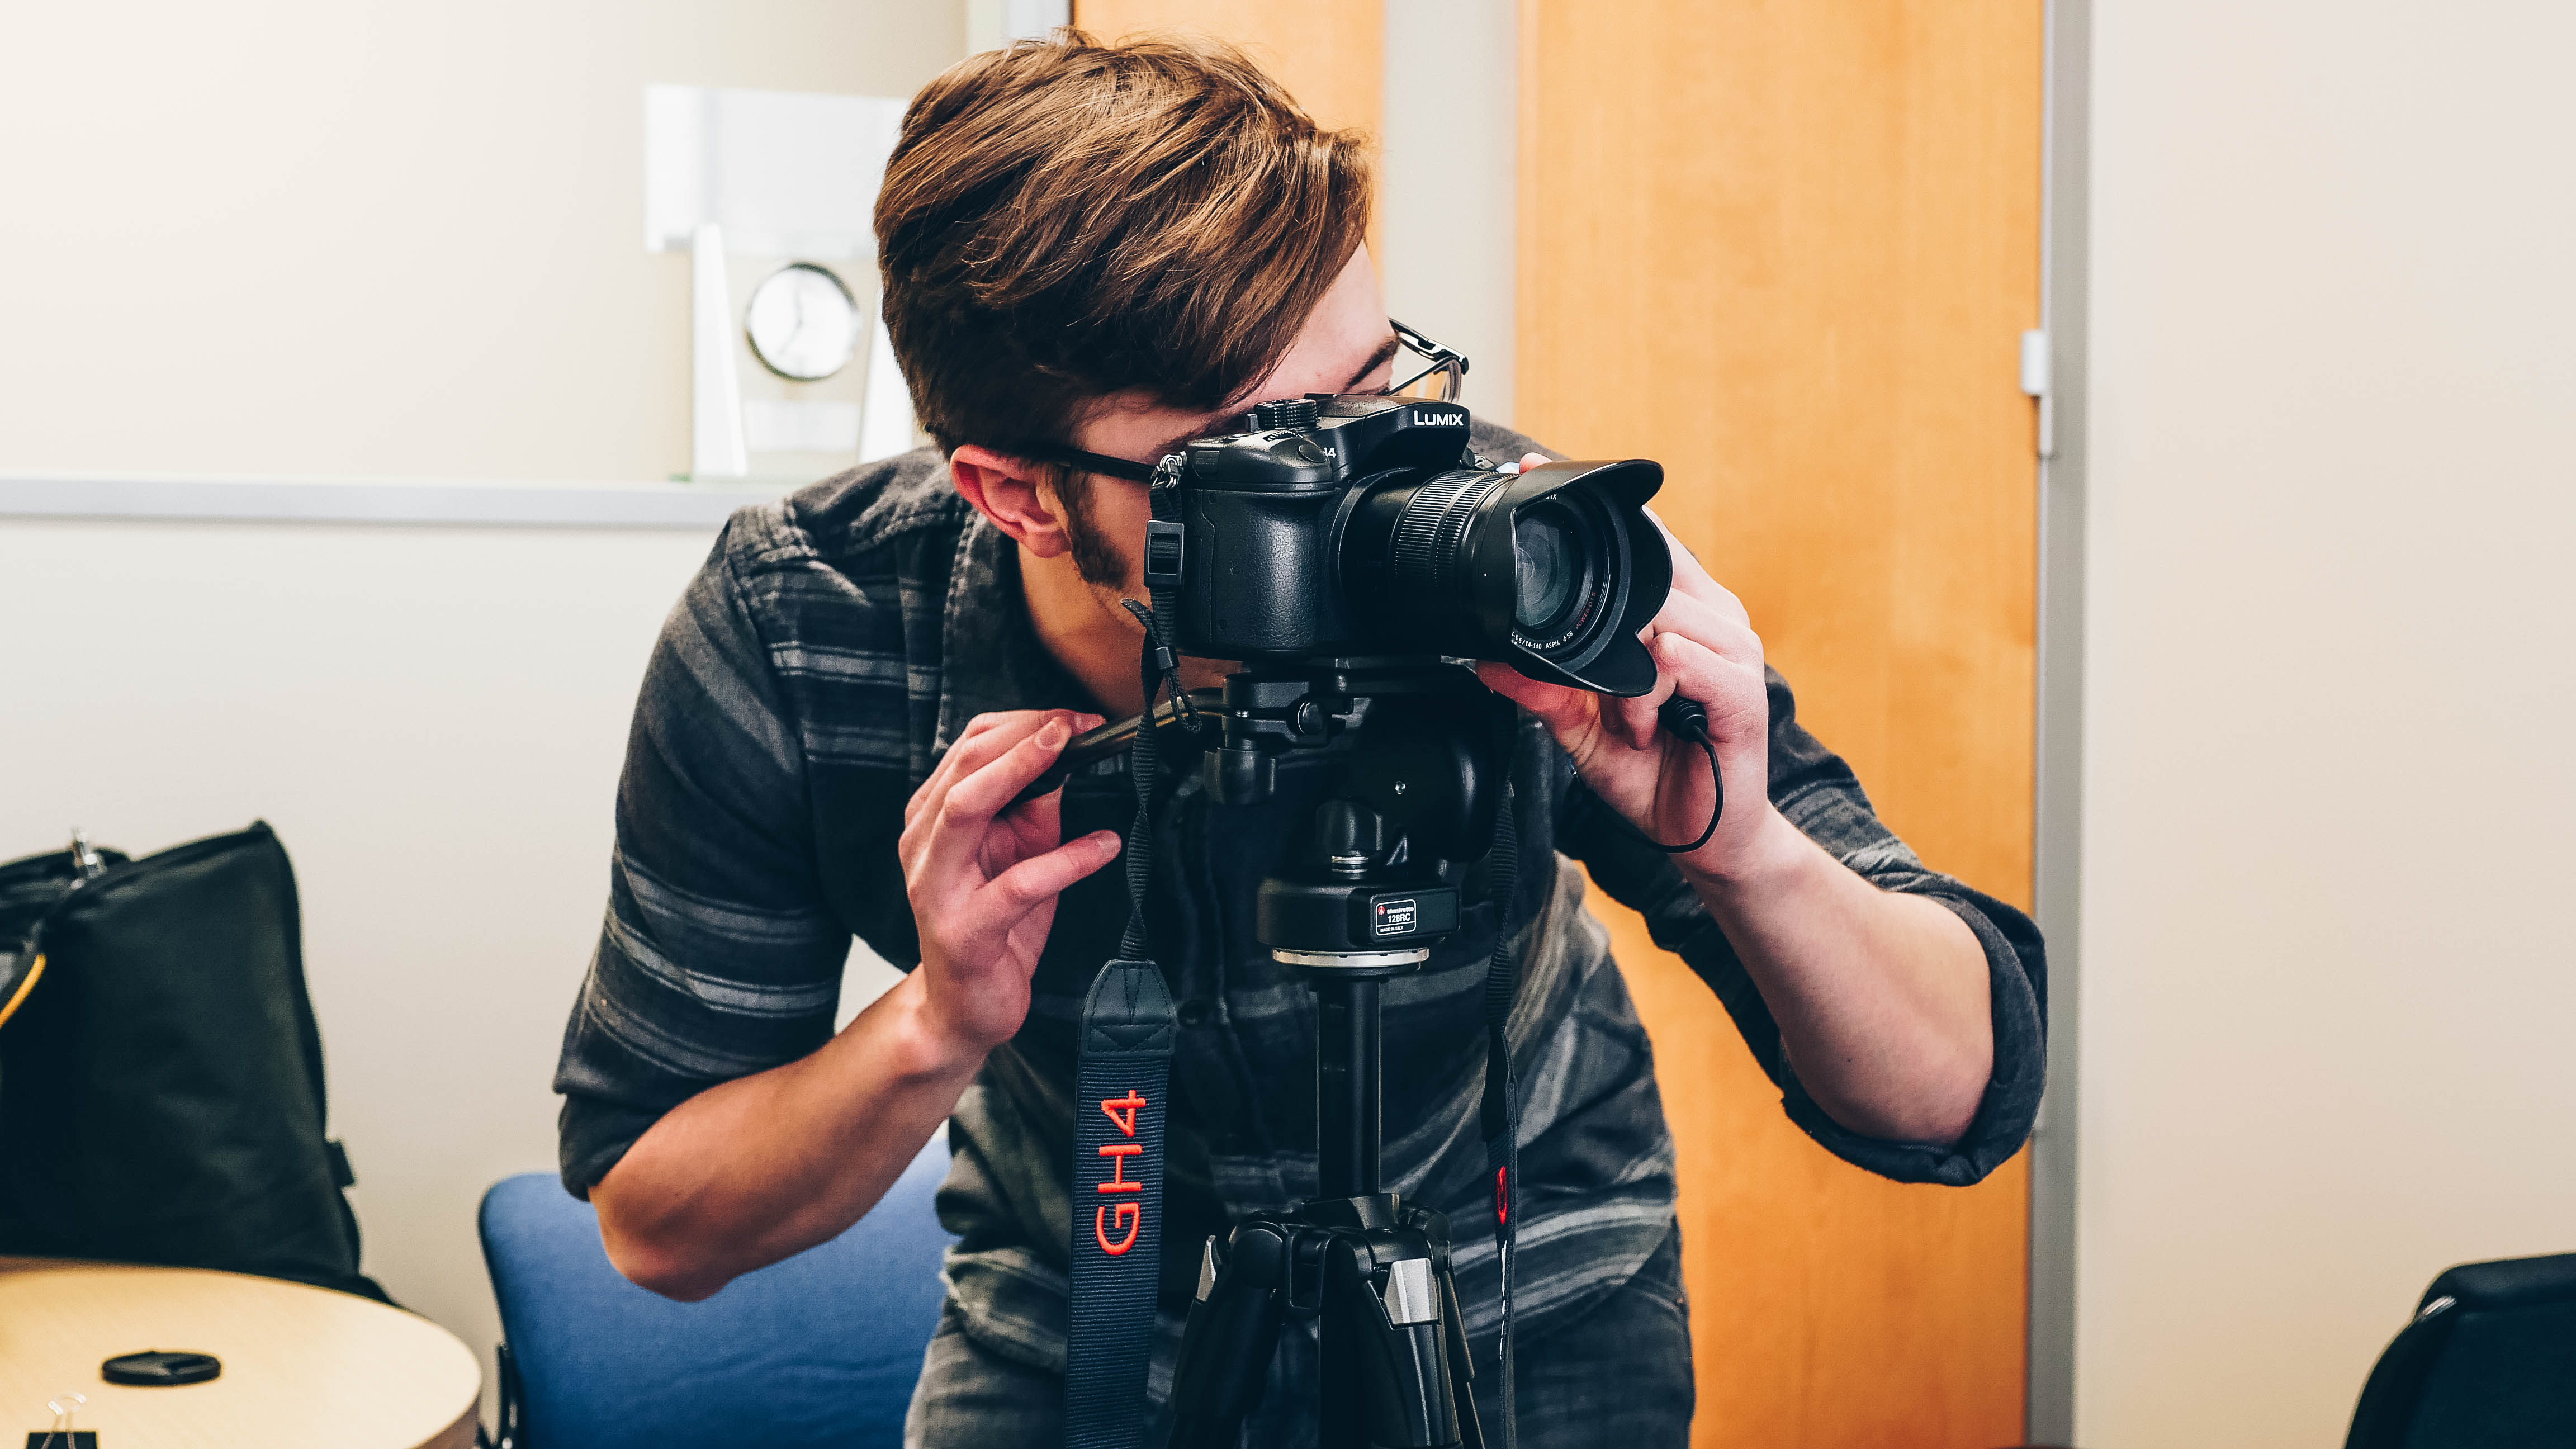 An MSU IT student employee with a video camera supporting the video production service